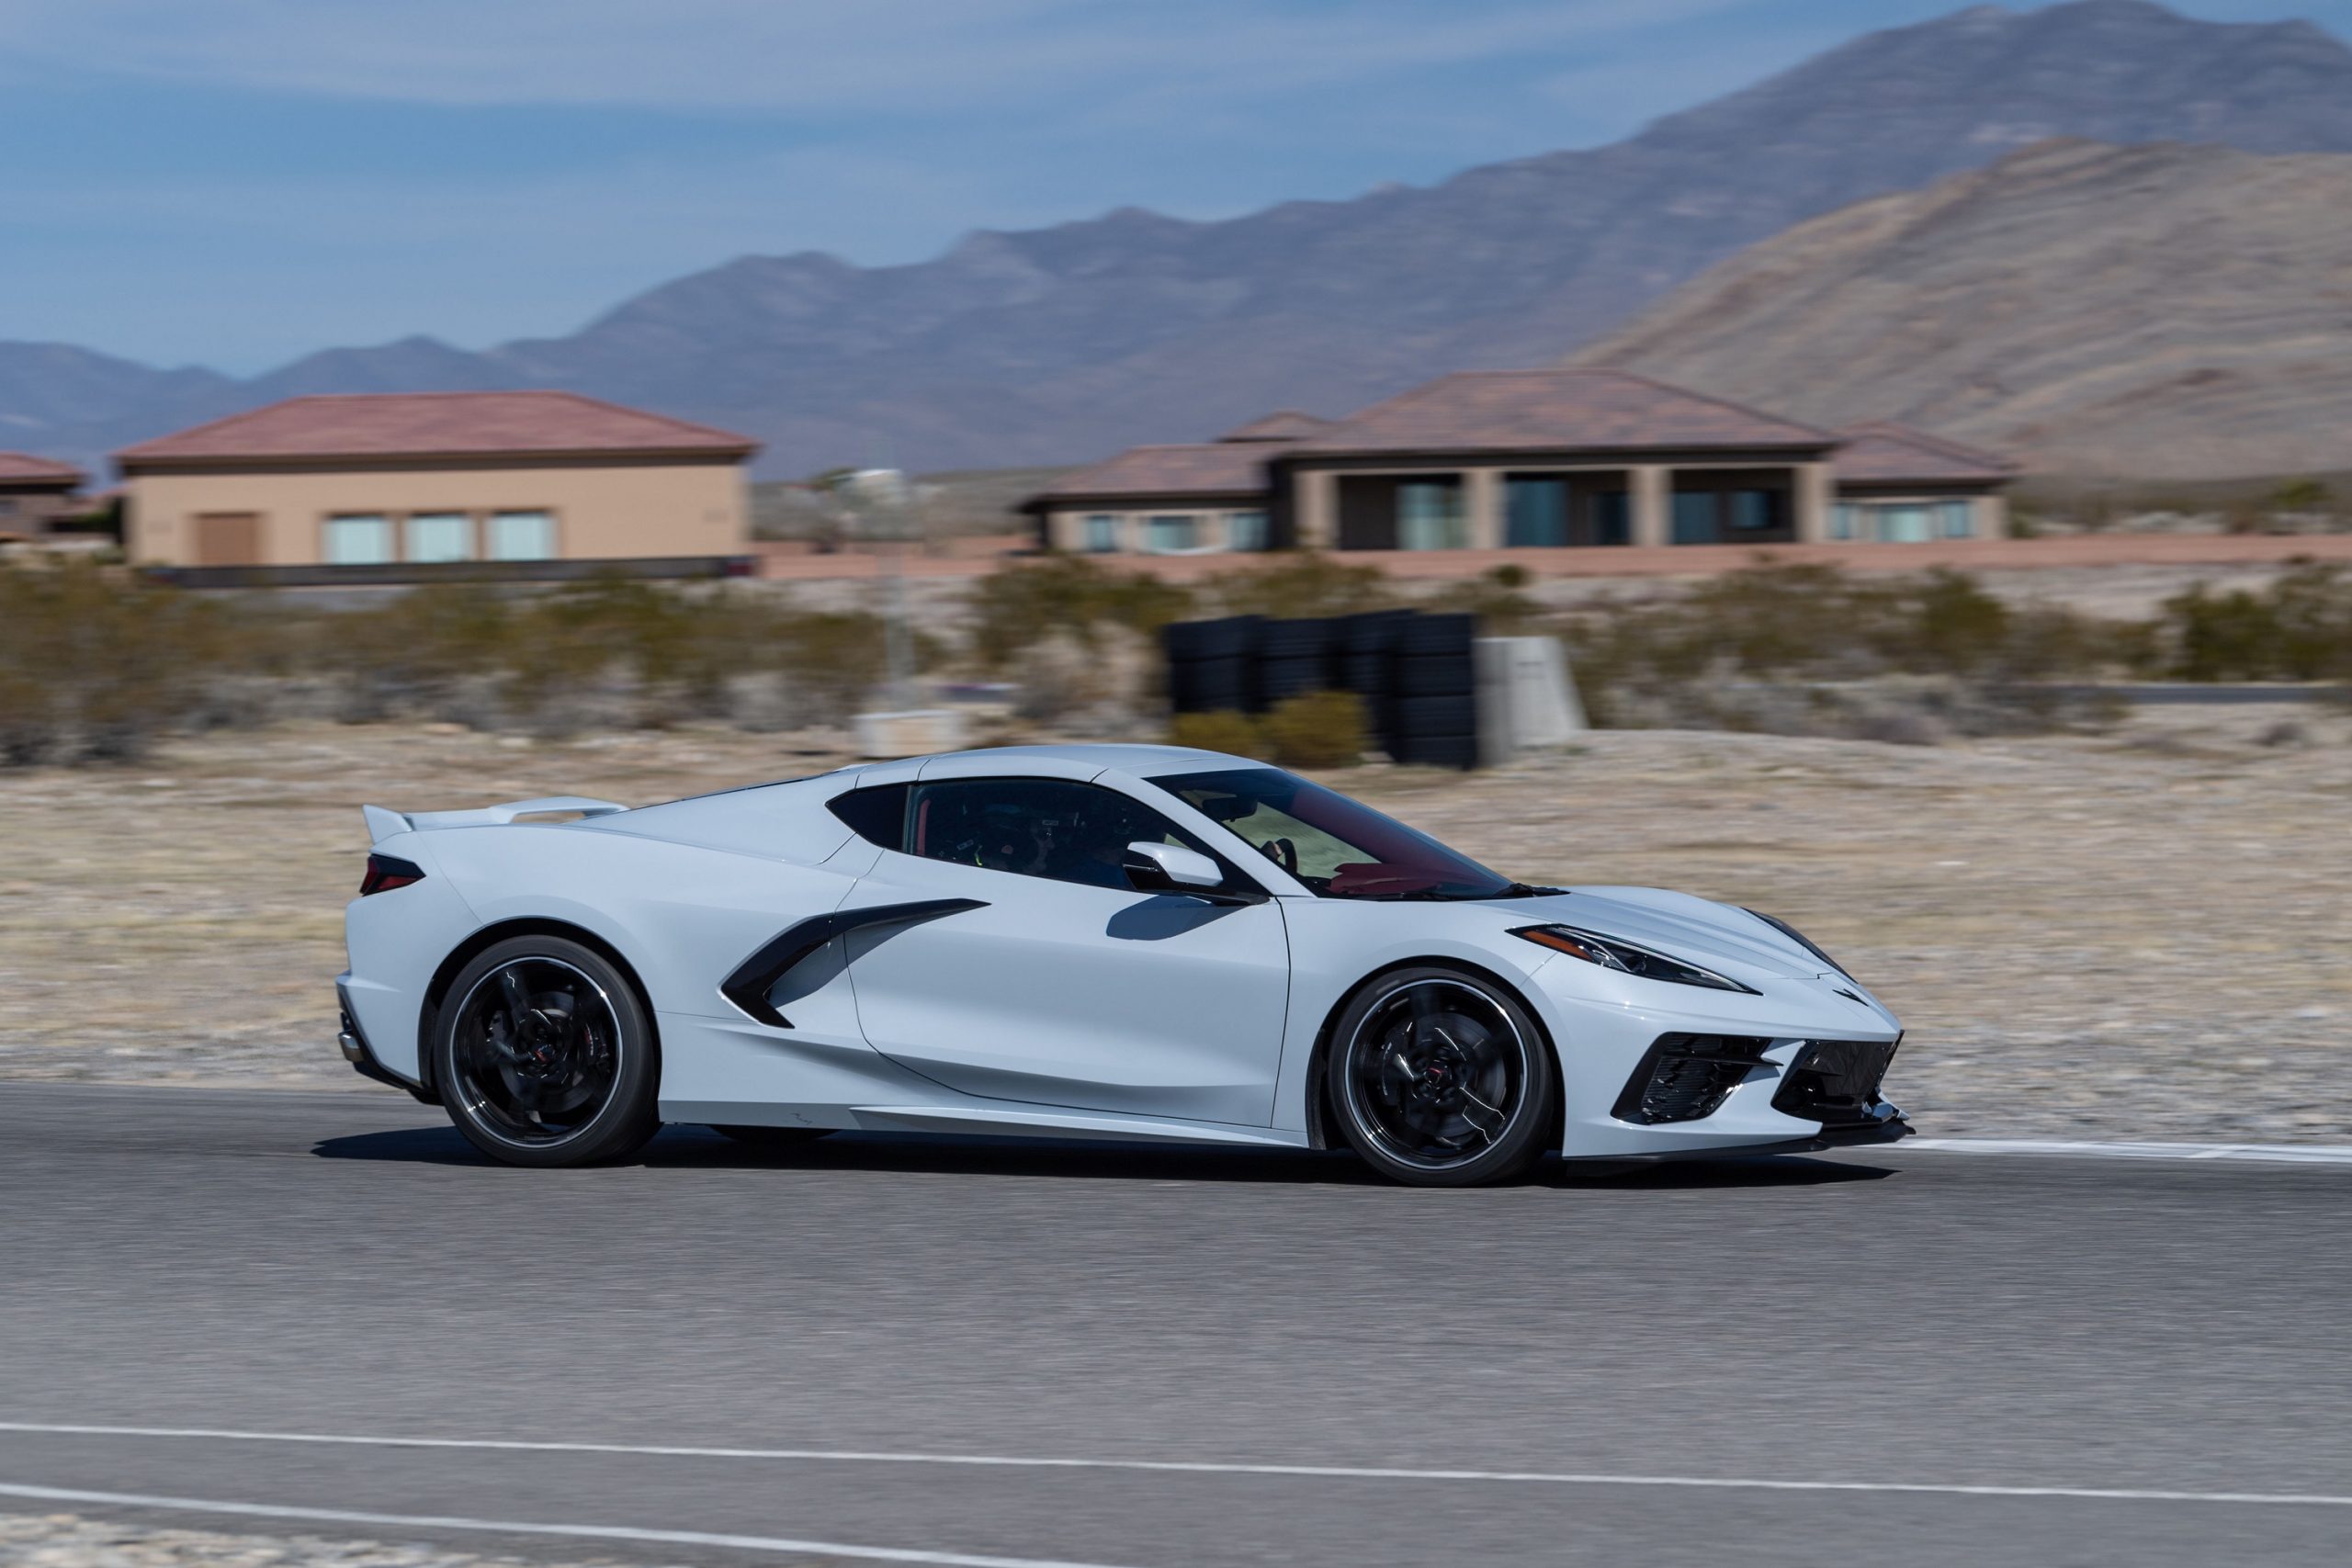 A white Chevrolet Corvette, the latest bargain sports car from Chevrolet, shot in profile on a race track